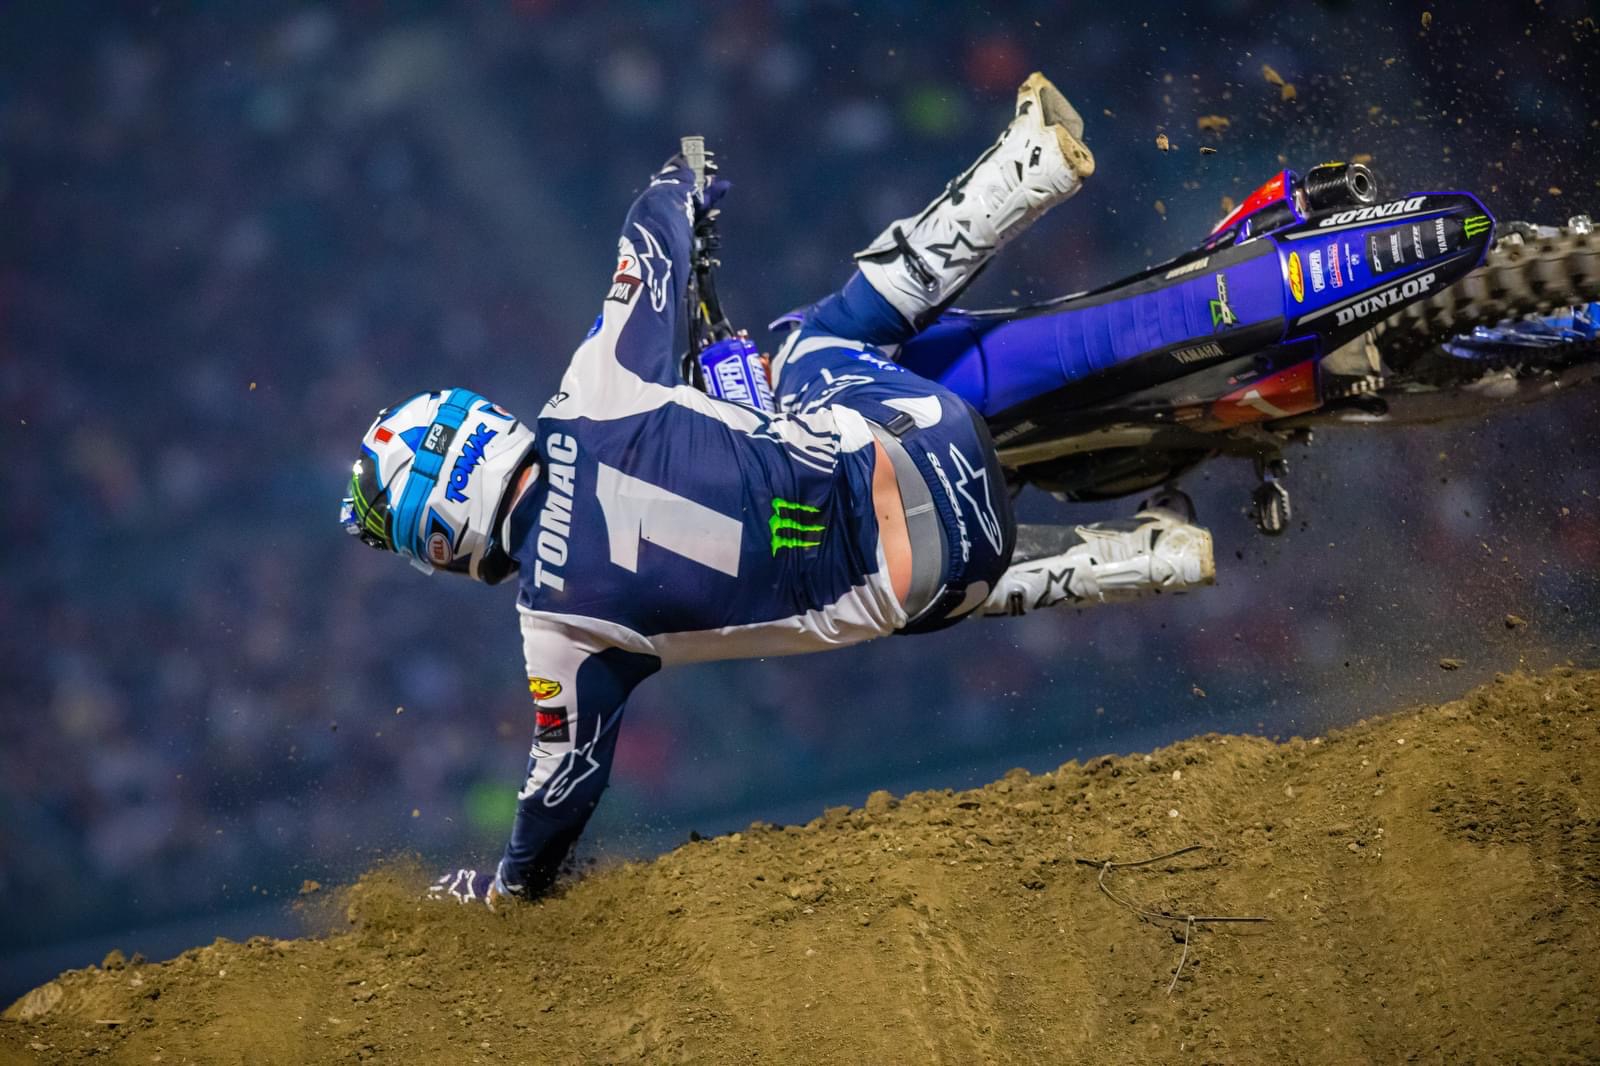 TWO-TIME SUPERCROSS CHAMPION FINALLY WINS OPENING ROUND